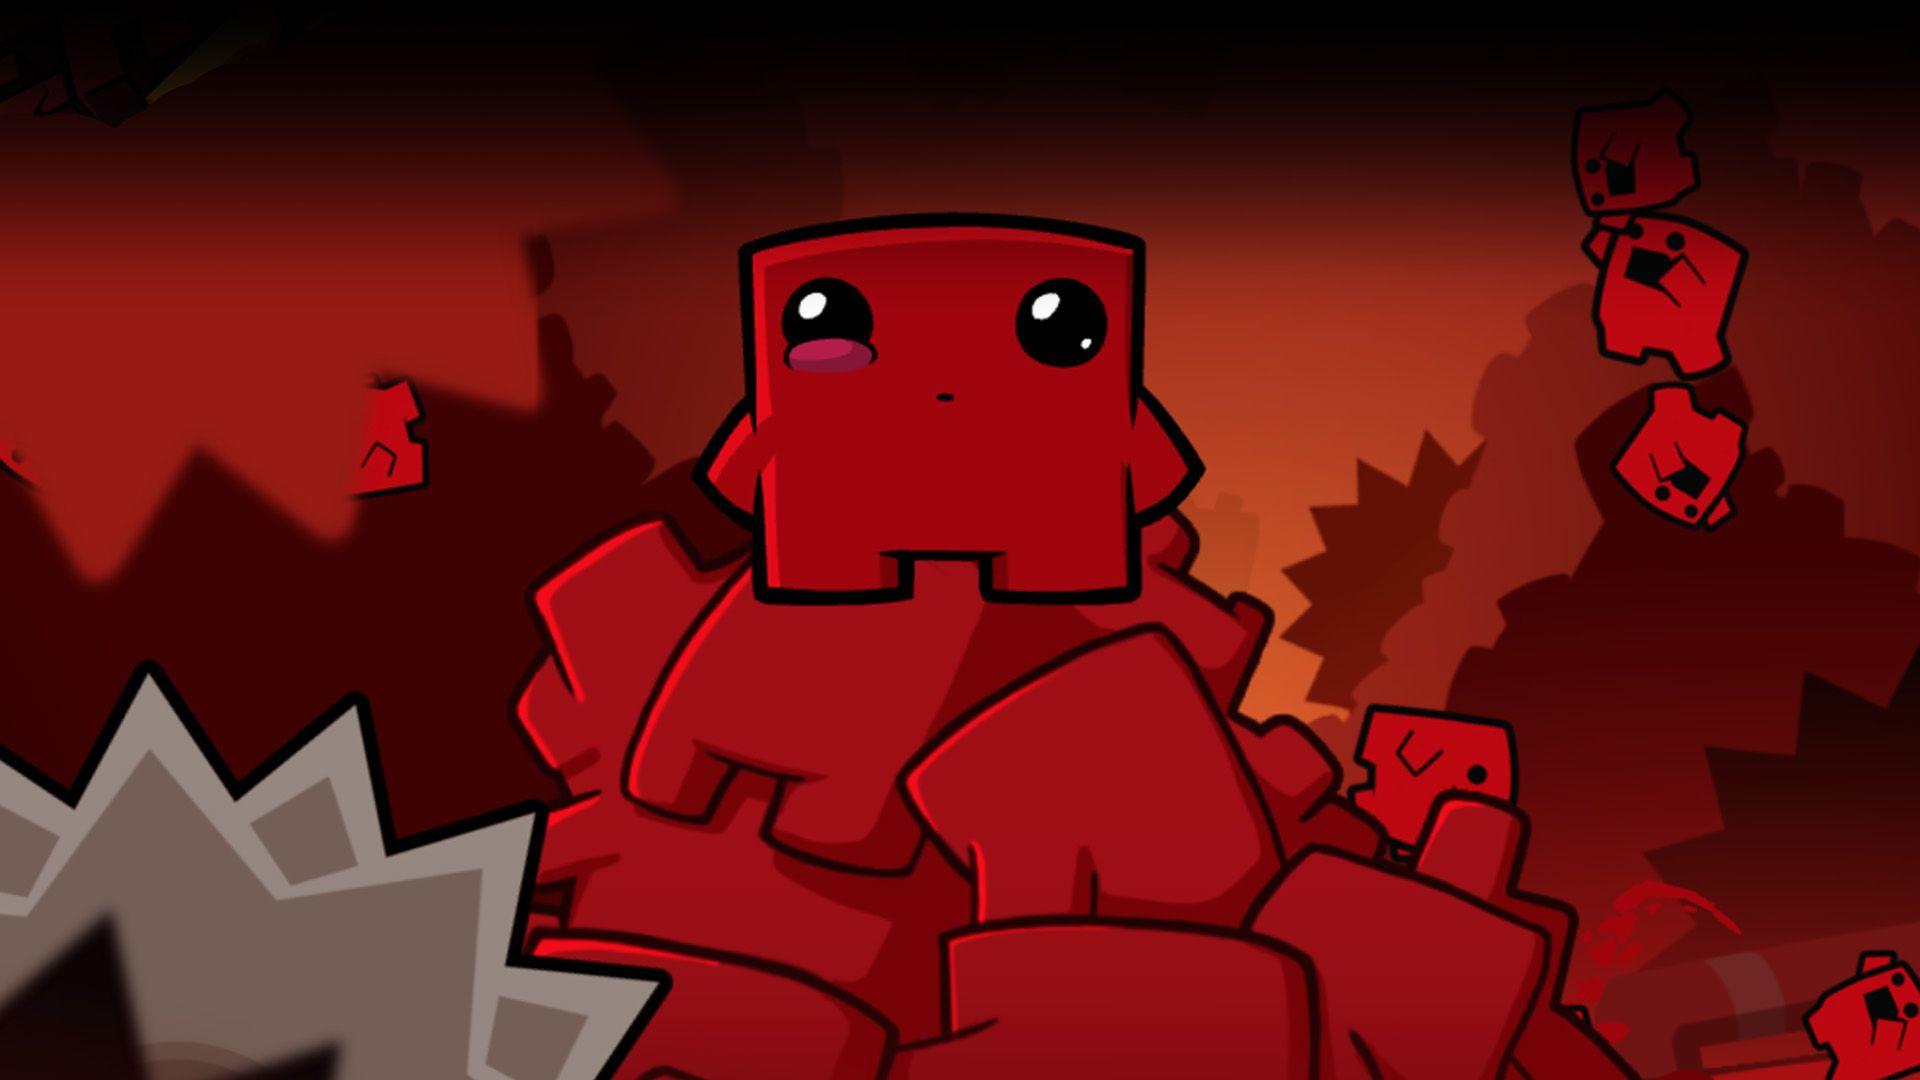 Super Meat Boy Forever Wallpapers Wallpaper Cave Images, Photos, Reviews